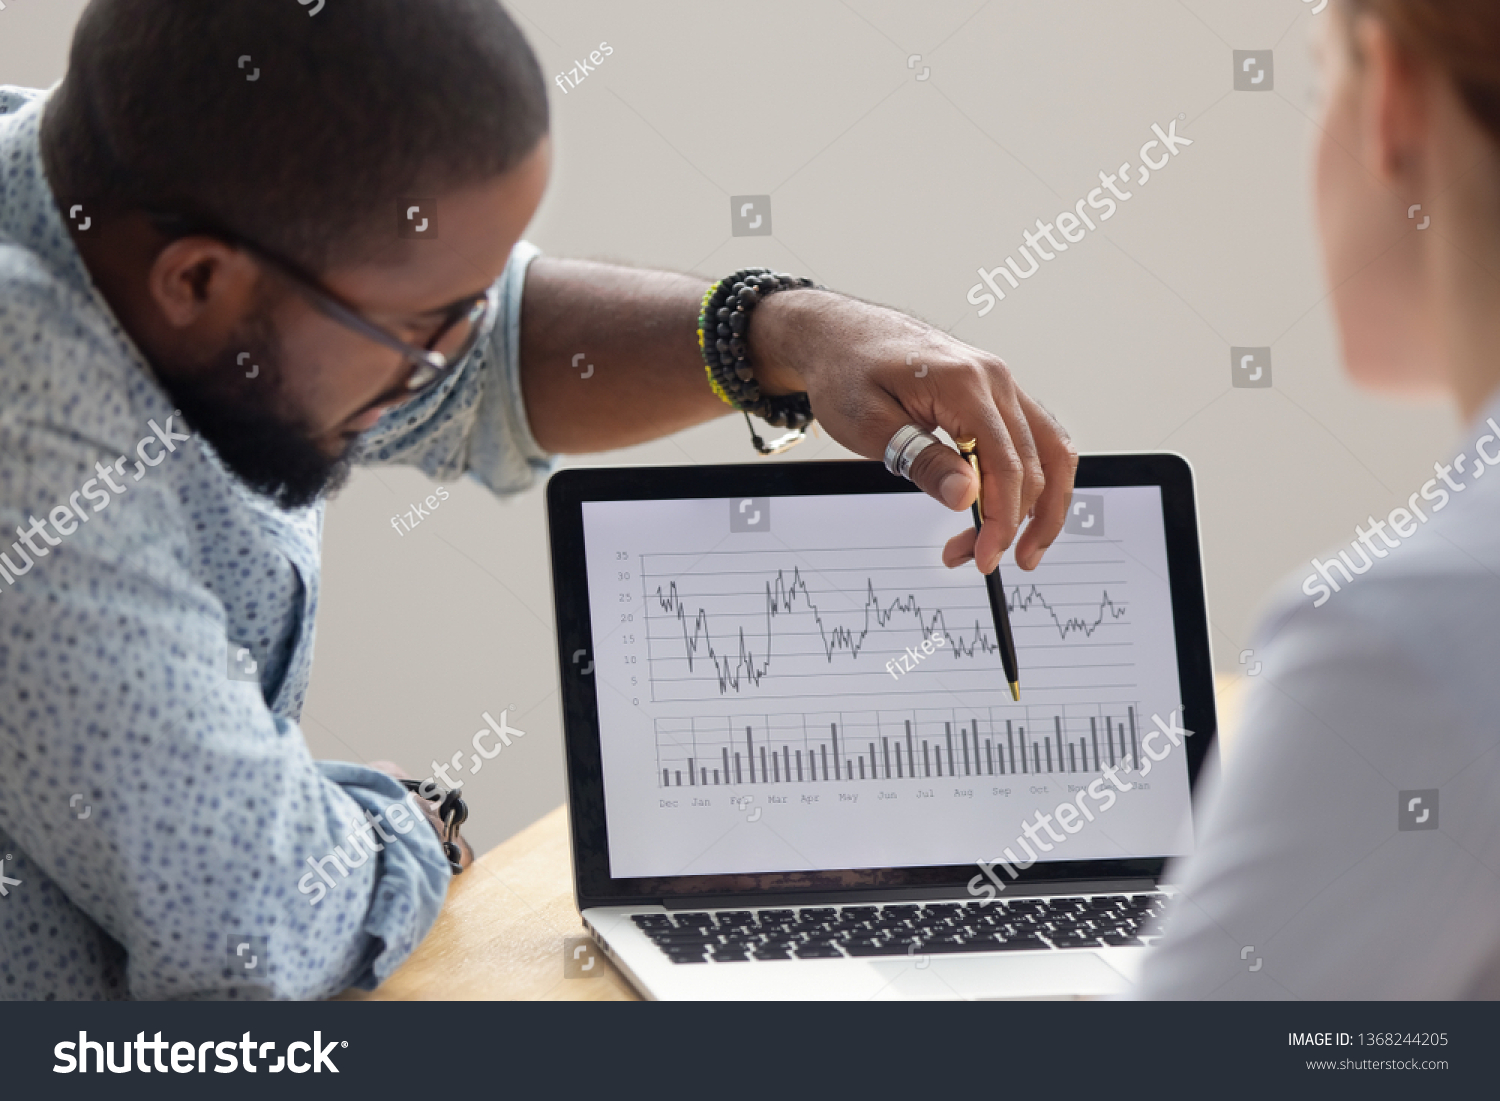 Focused african analyst showing client or colleague annual financial report analyzing business data on laptop screen using software for digital graphic statistic analysis, economic market graphs  #1368244205